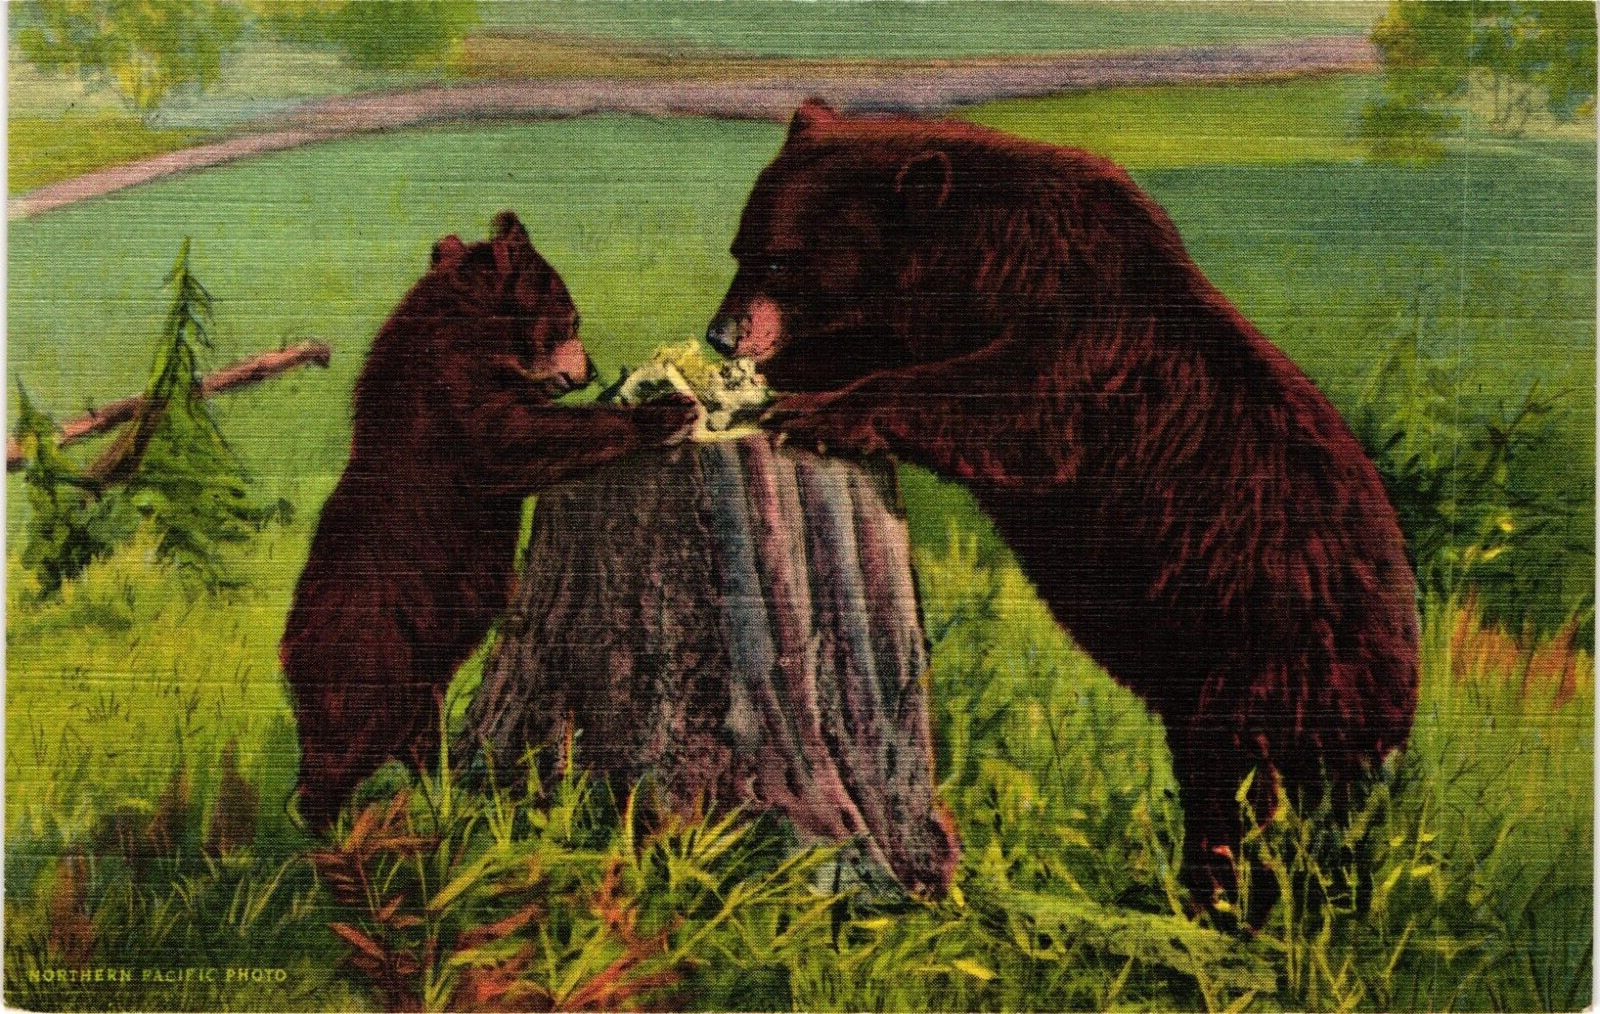 Mama & Cub Bears Learning Table Manners NORTHERN PACIFIC Rail Photo Postcard